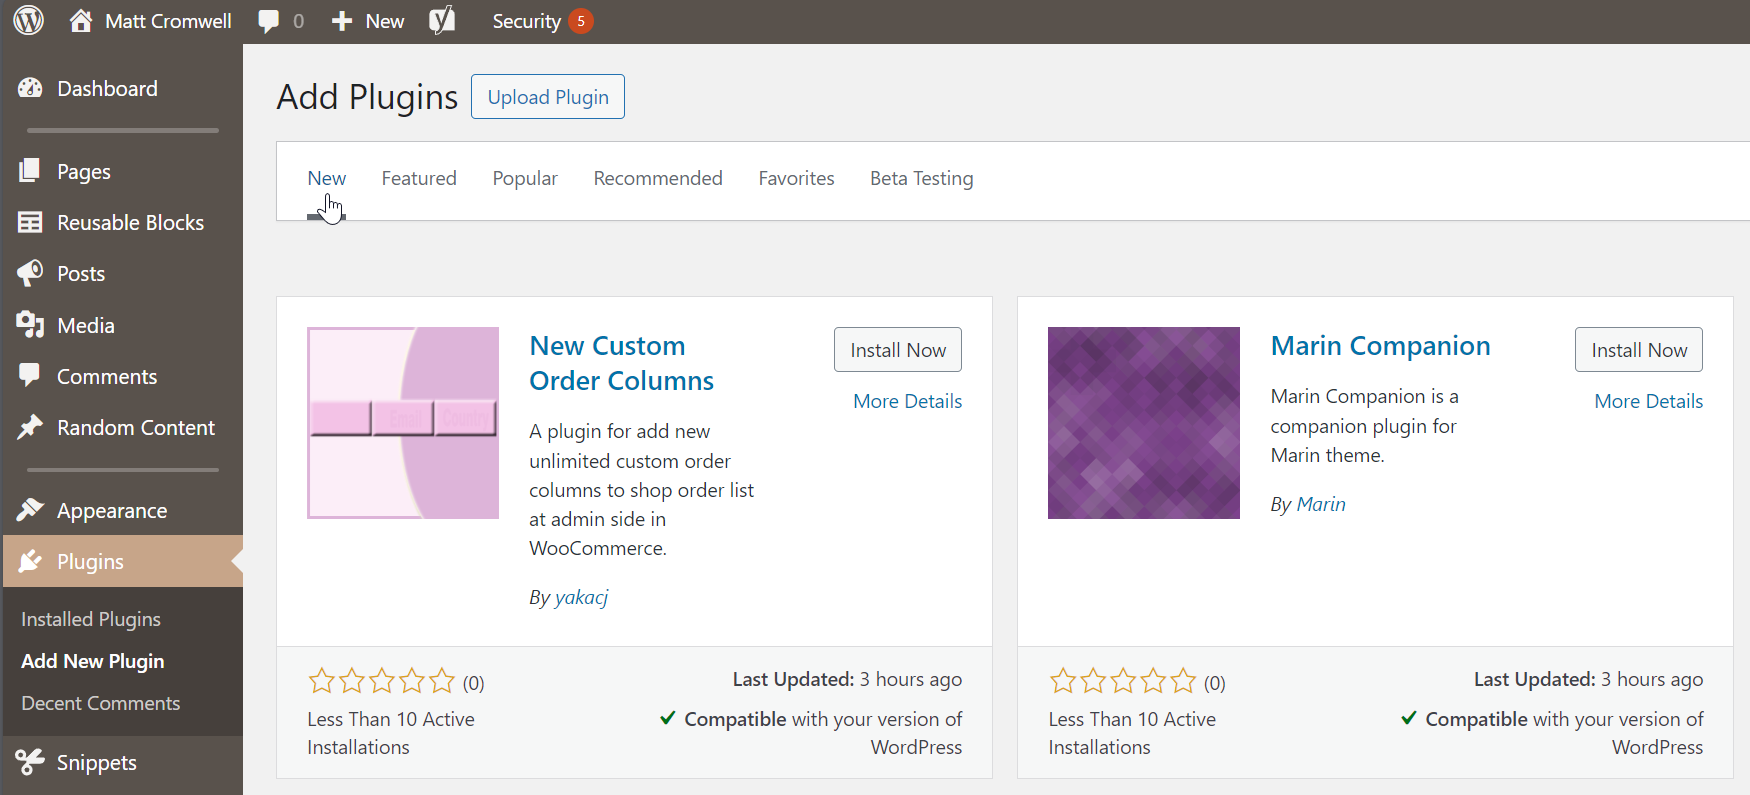 A screenshot of the WordPress dashboard 'Add Plugins' page with options to filter by 'New,' 'Featured,' 'Popular,' 'Recommended,' 'Favorites,' and 'Beta Testing.' The screen displays two plugin options: "New Custom Order Columns" and "Marin Companion" with their respective details, ratings, and the 'Install Now' button visible.